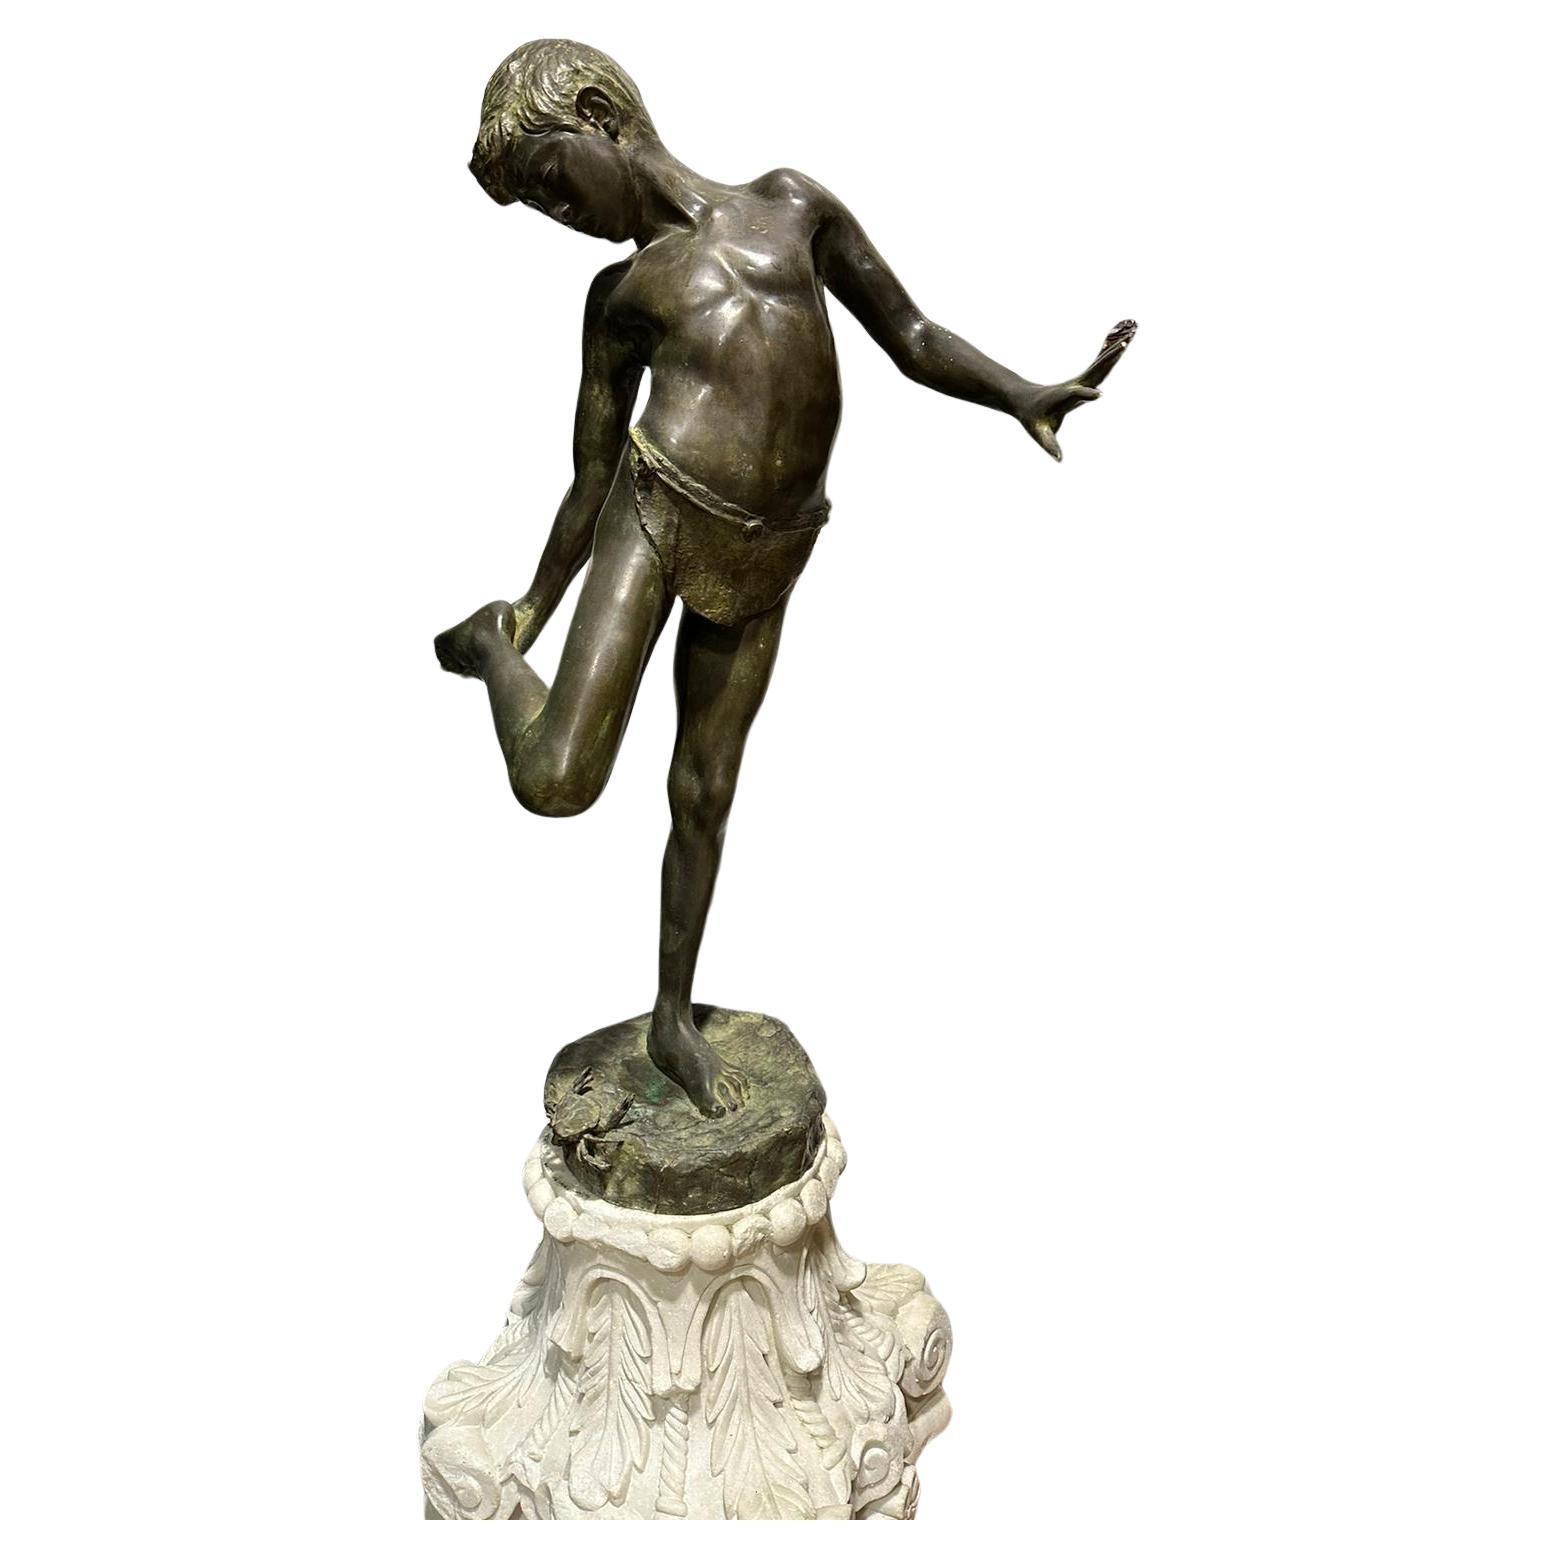 Spectacular Patinated Bronze SCULPTURE "The Child and the Crab" 19th Cent. VIDEO